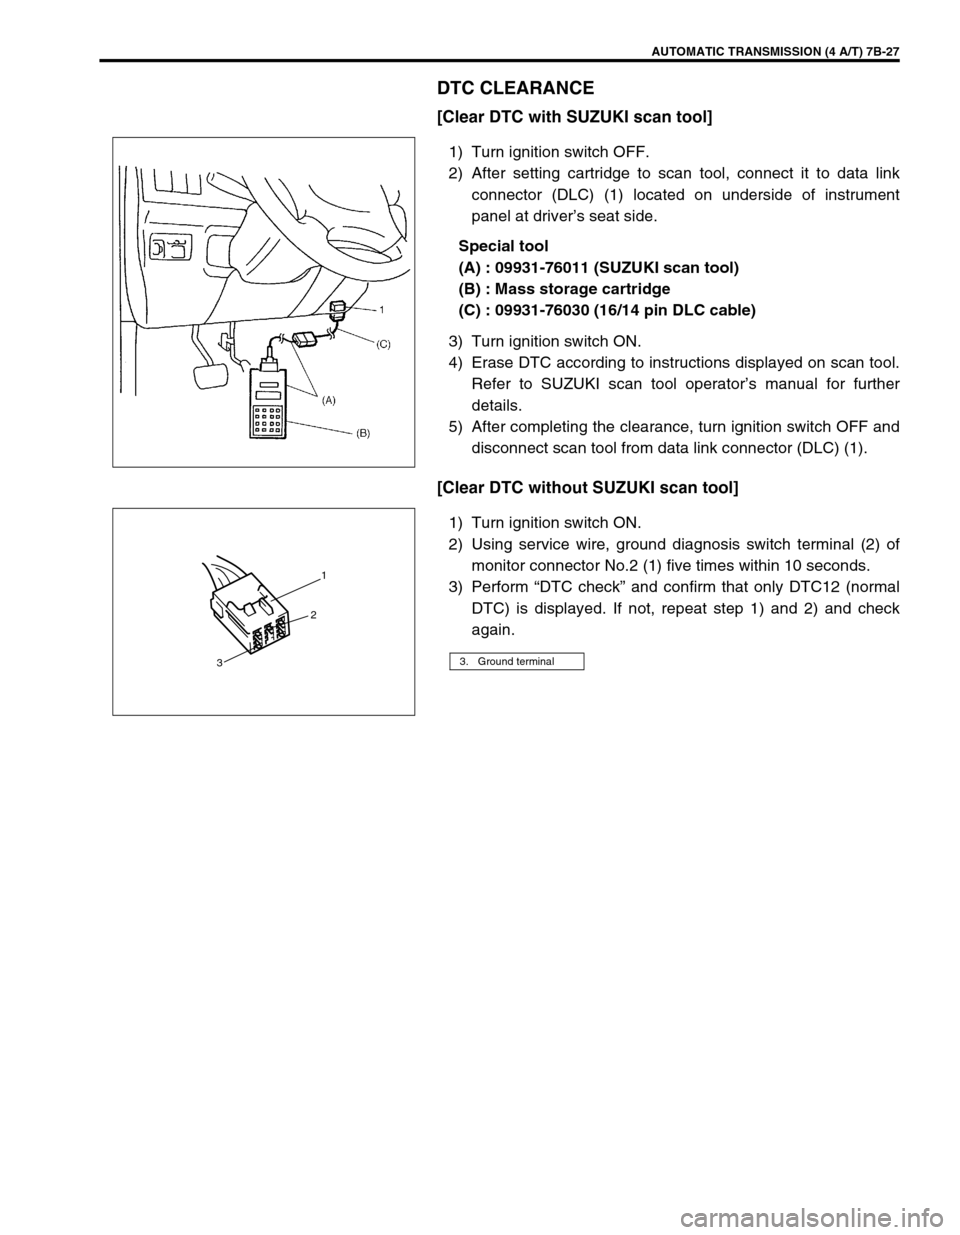 SUZUKI SWIFT 2000 1.G Transmission Service Workshop Manual AUTOMATIC TRANSMISSION (4 A/T) 7B-27
DTC CLEARANCE
[Clear DTC with SUZUKI scan tool]
1) Turn ignition switch OFF.
2) After setting cartridge to scan tool, connect it to data link
connector (DLC) (1) l